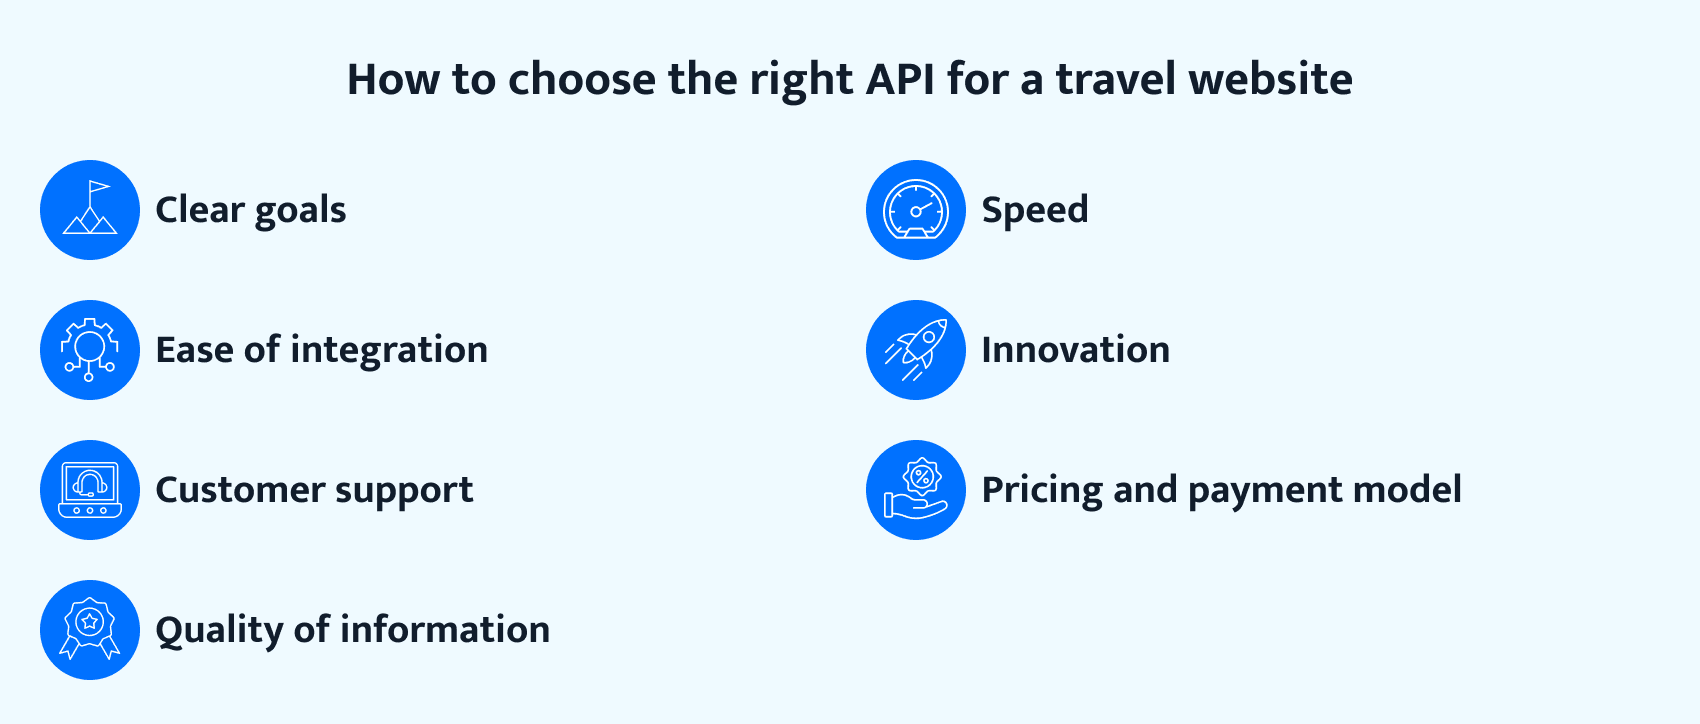 how to choose an API for travel website